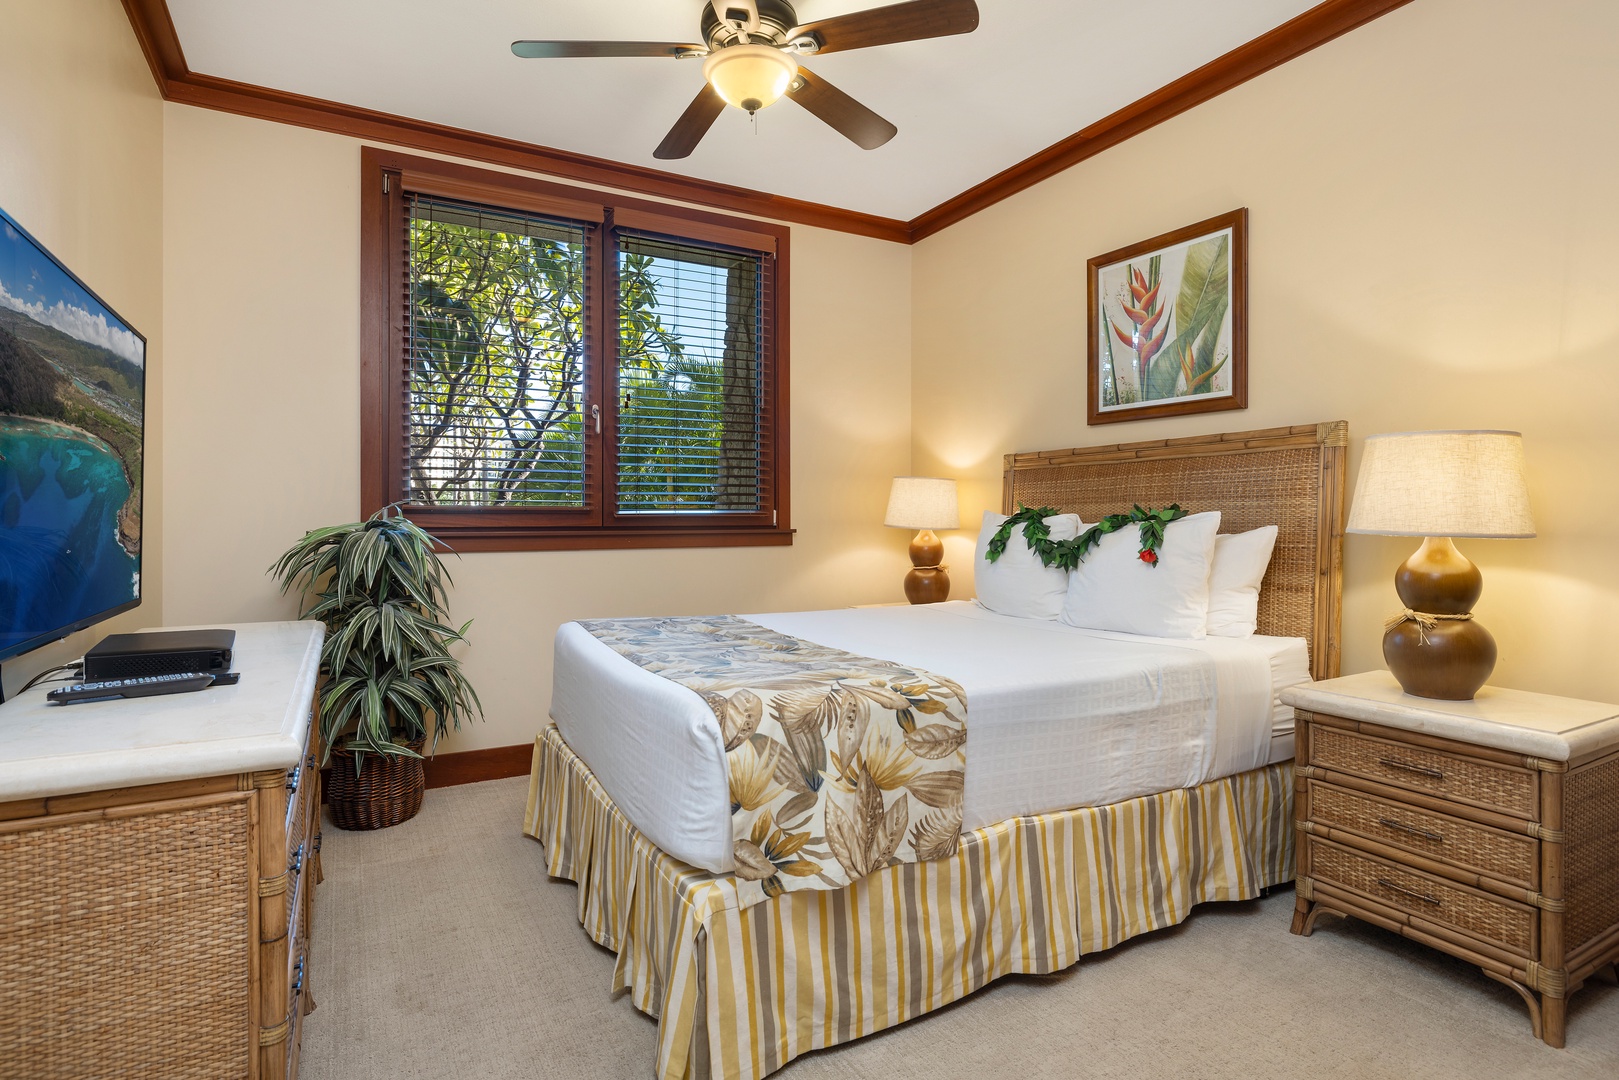 Kapolei Vacation Rentals, Ko Olina Beach Villas B107 - The second guest bedroom with a queen bed.